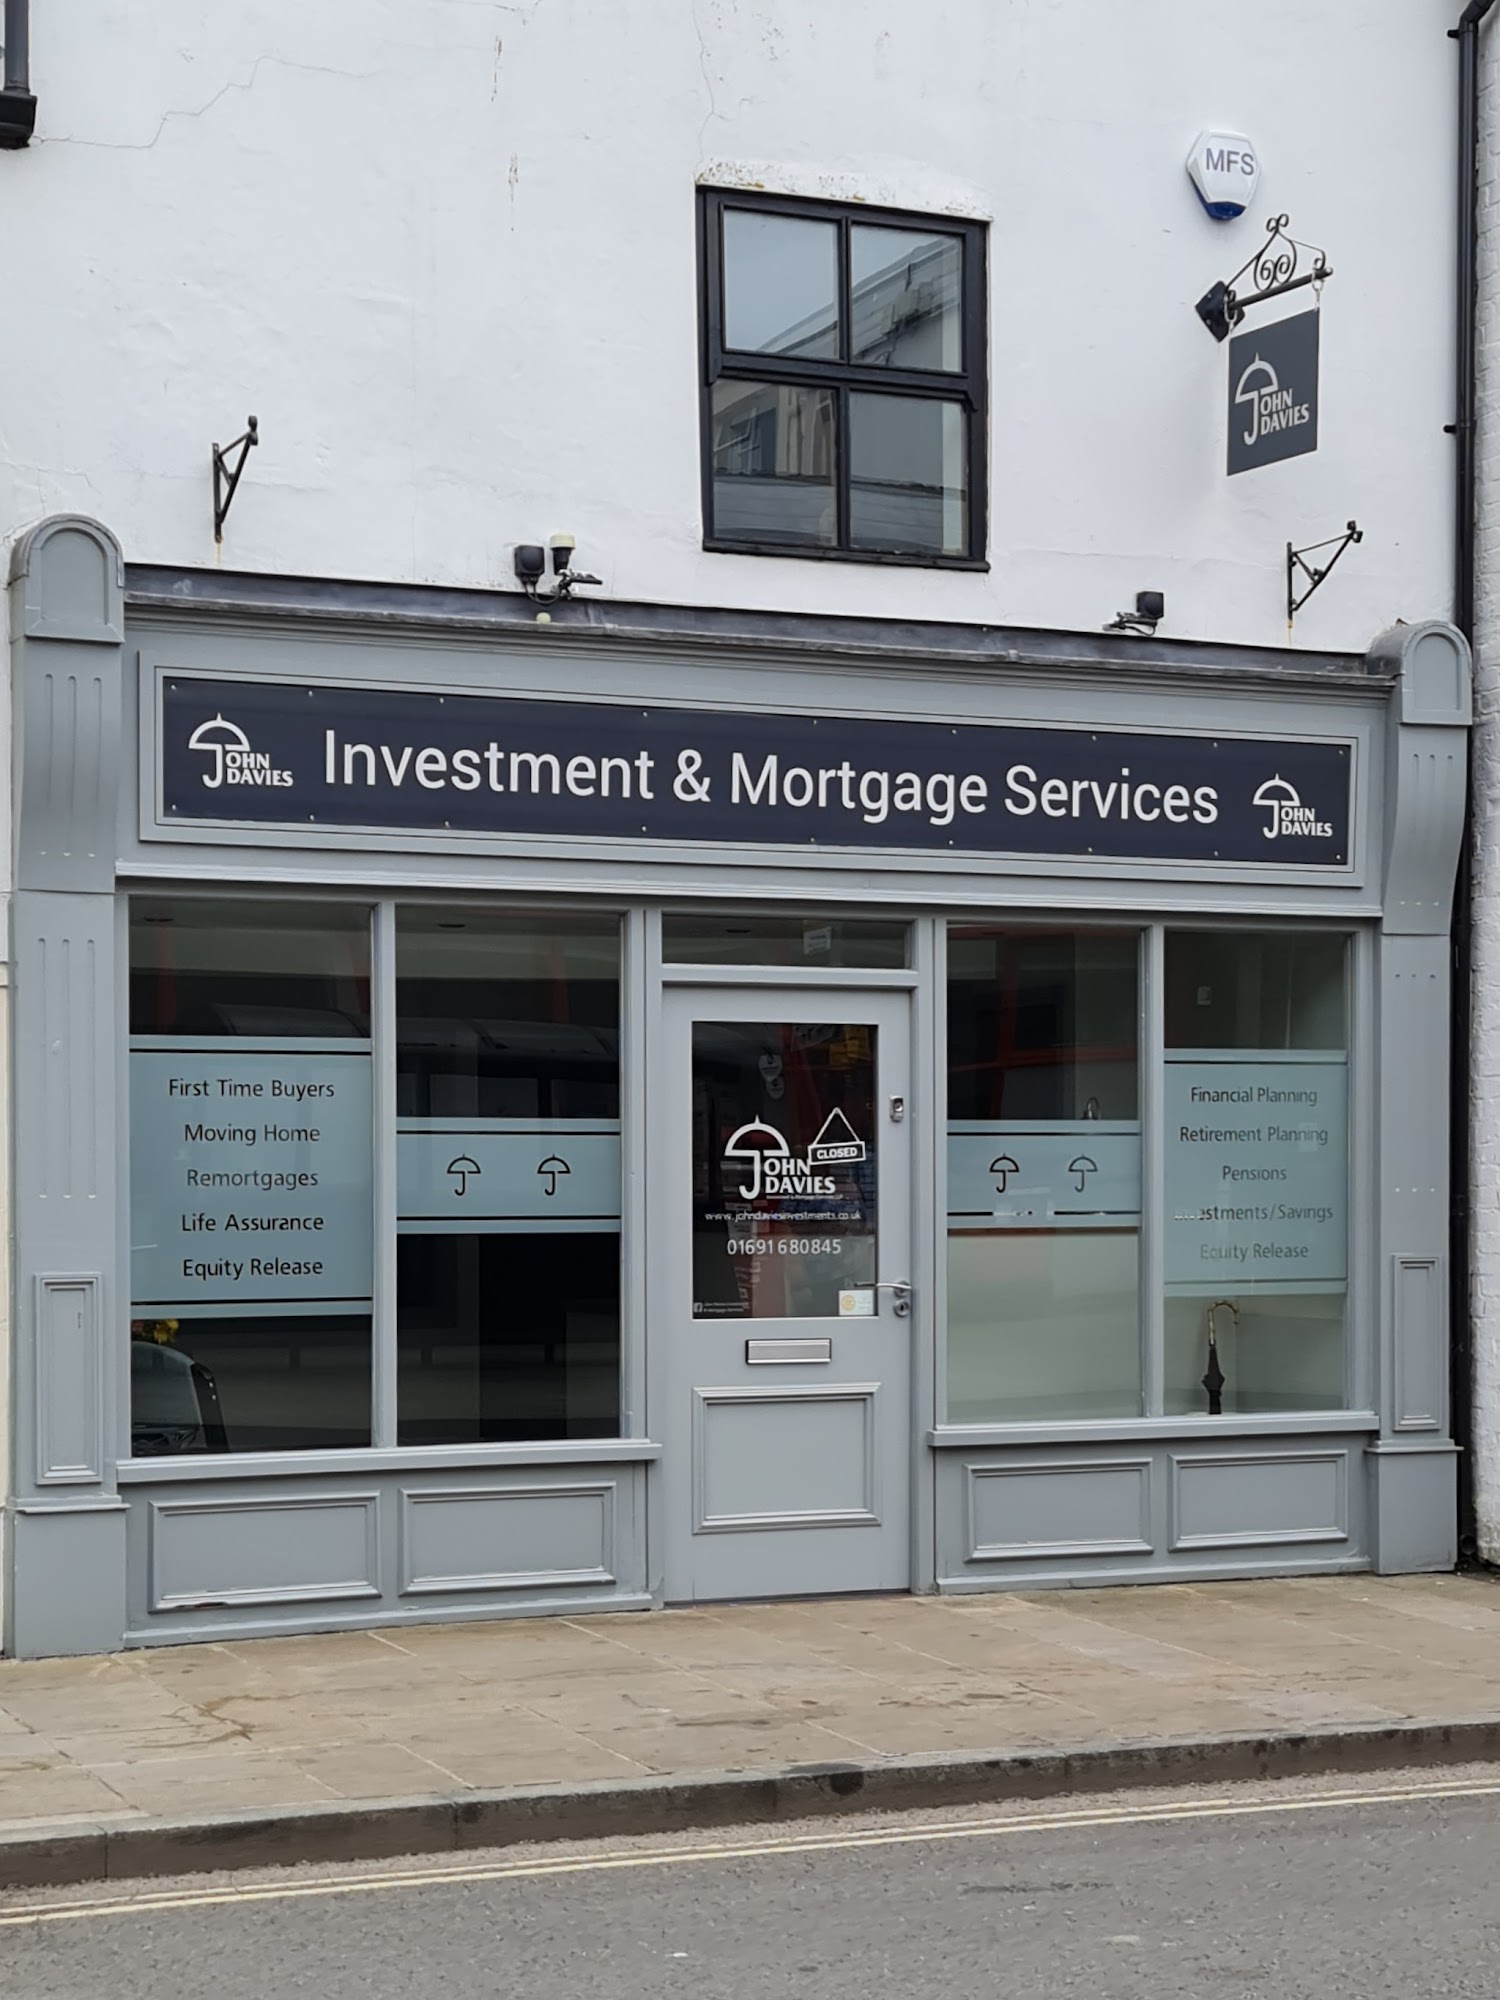 John Davies Investments & Mortgages